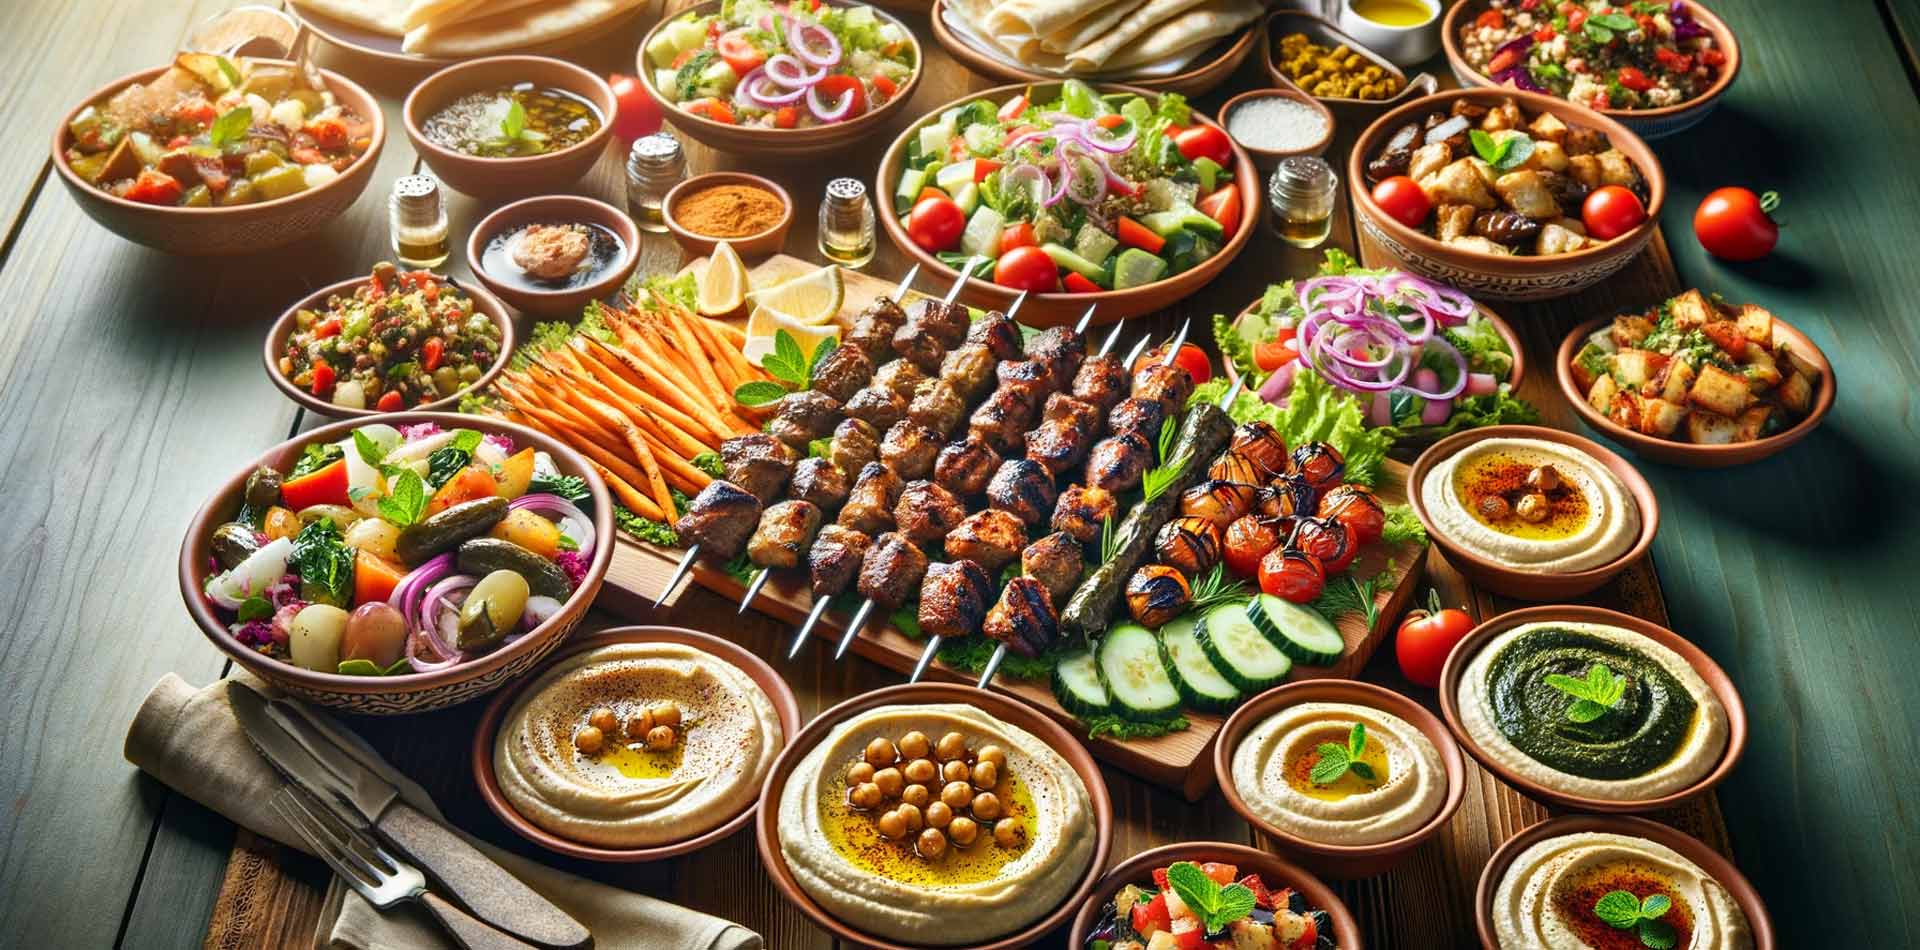 catering table with mediterranean food